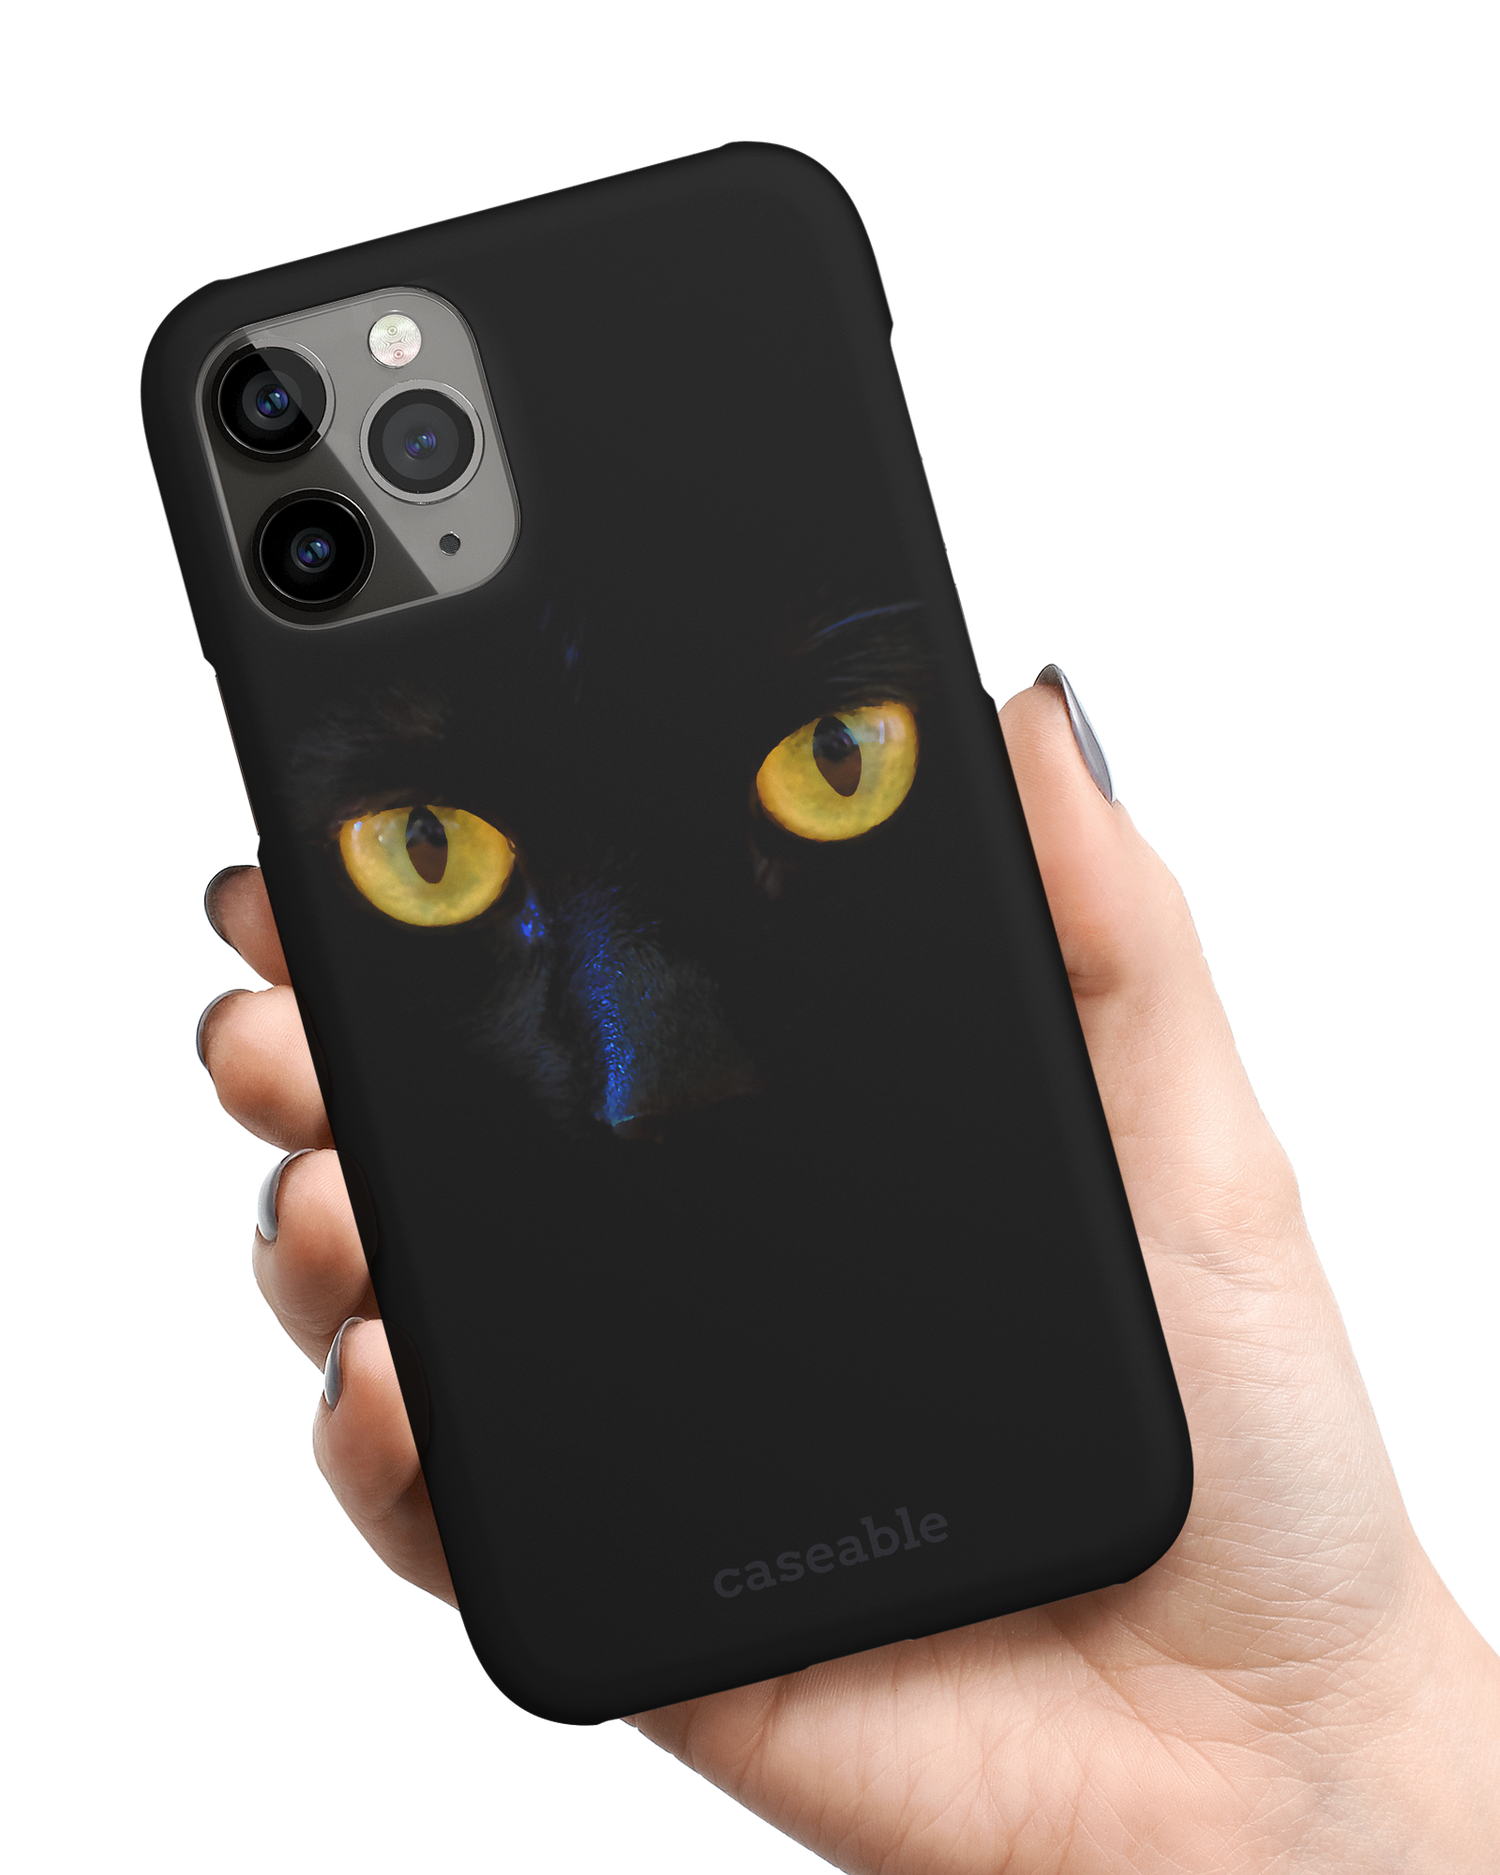 Black Cat Hard Shell Phone Case Apple iPhone 11 Pro Max held in hand